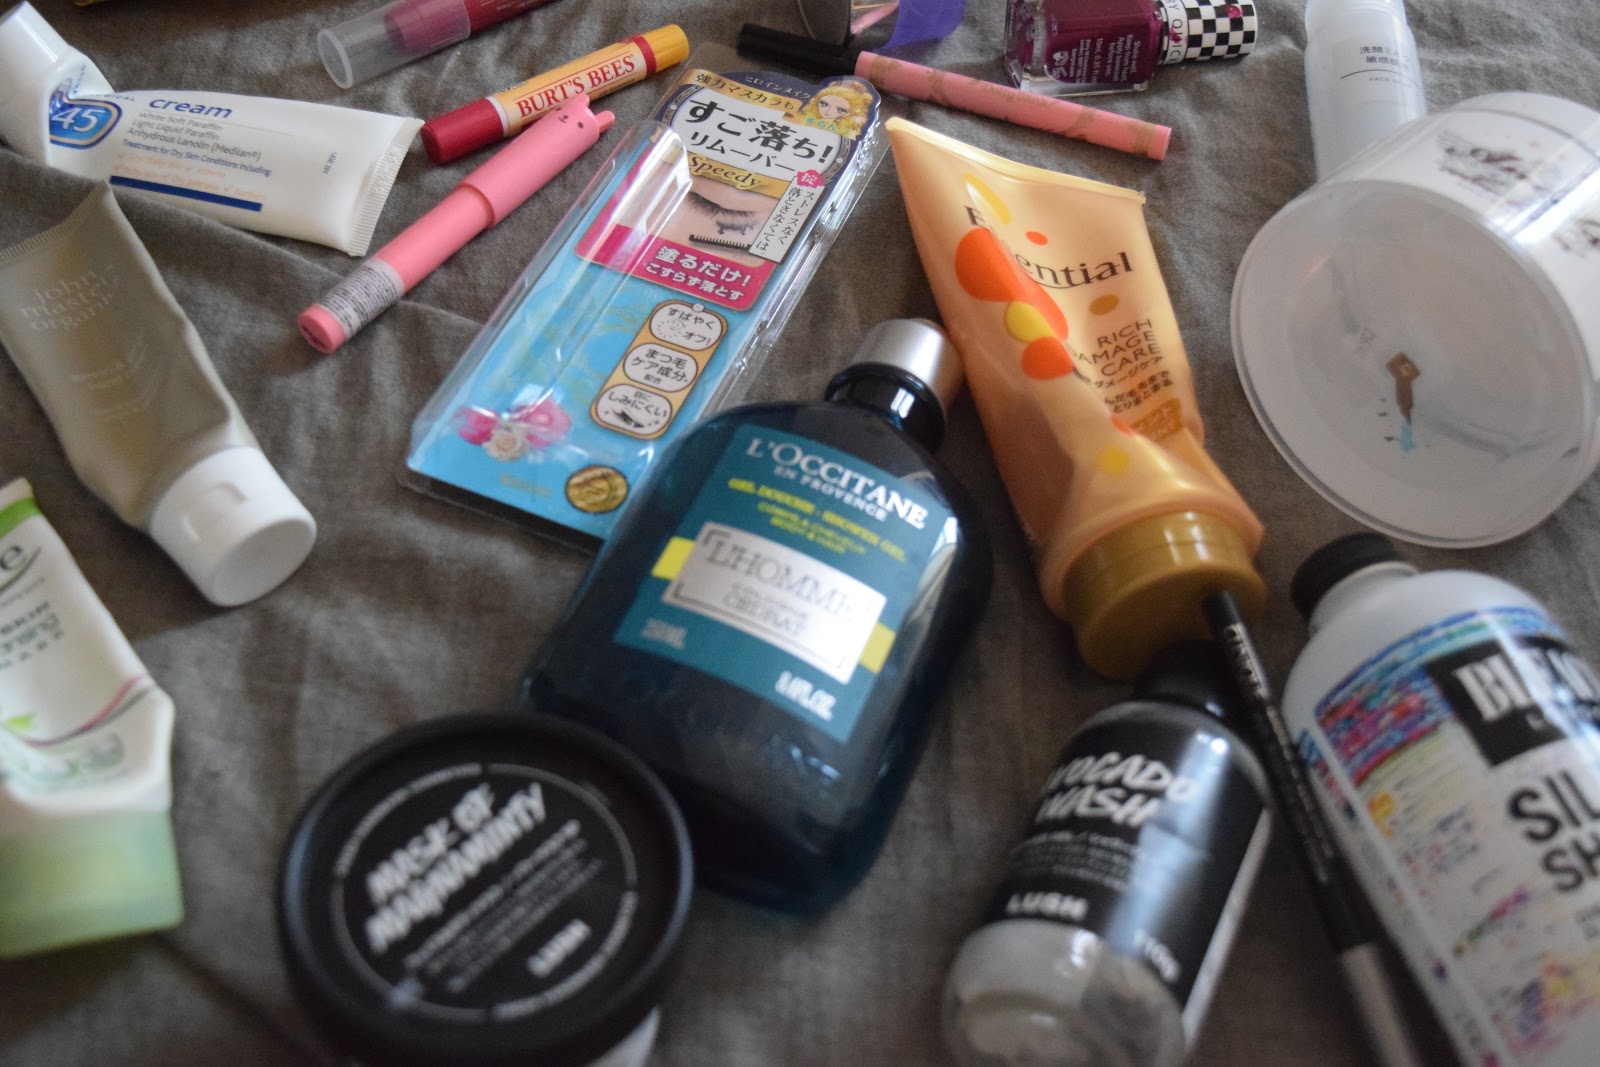 Flatlay of empty beauty products including skincare, makeup and hair care